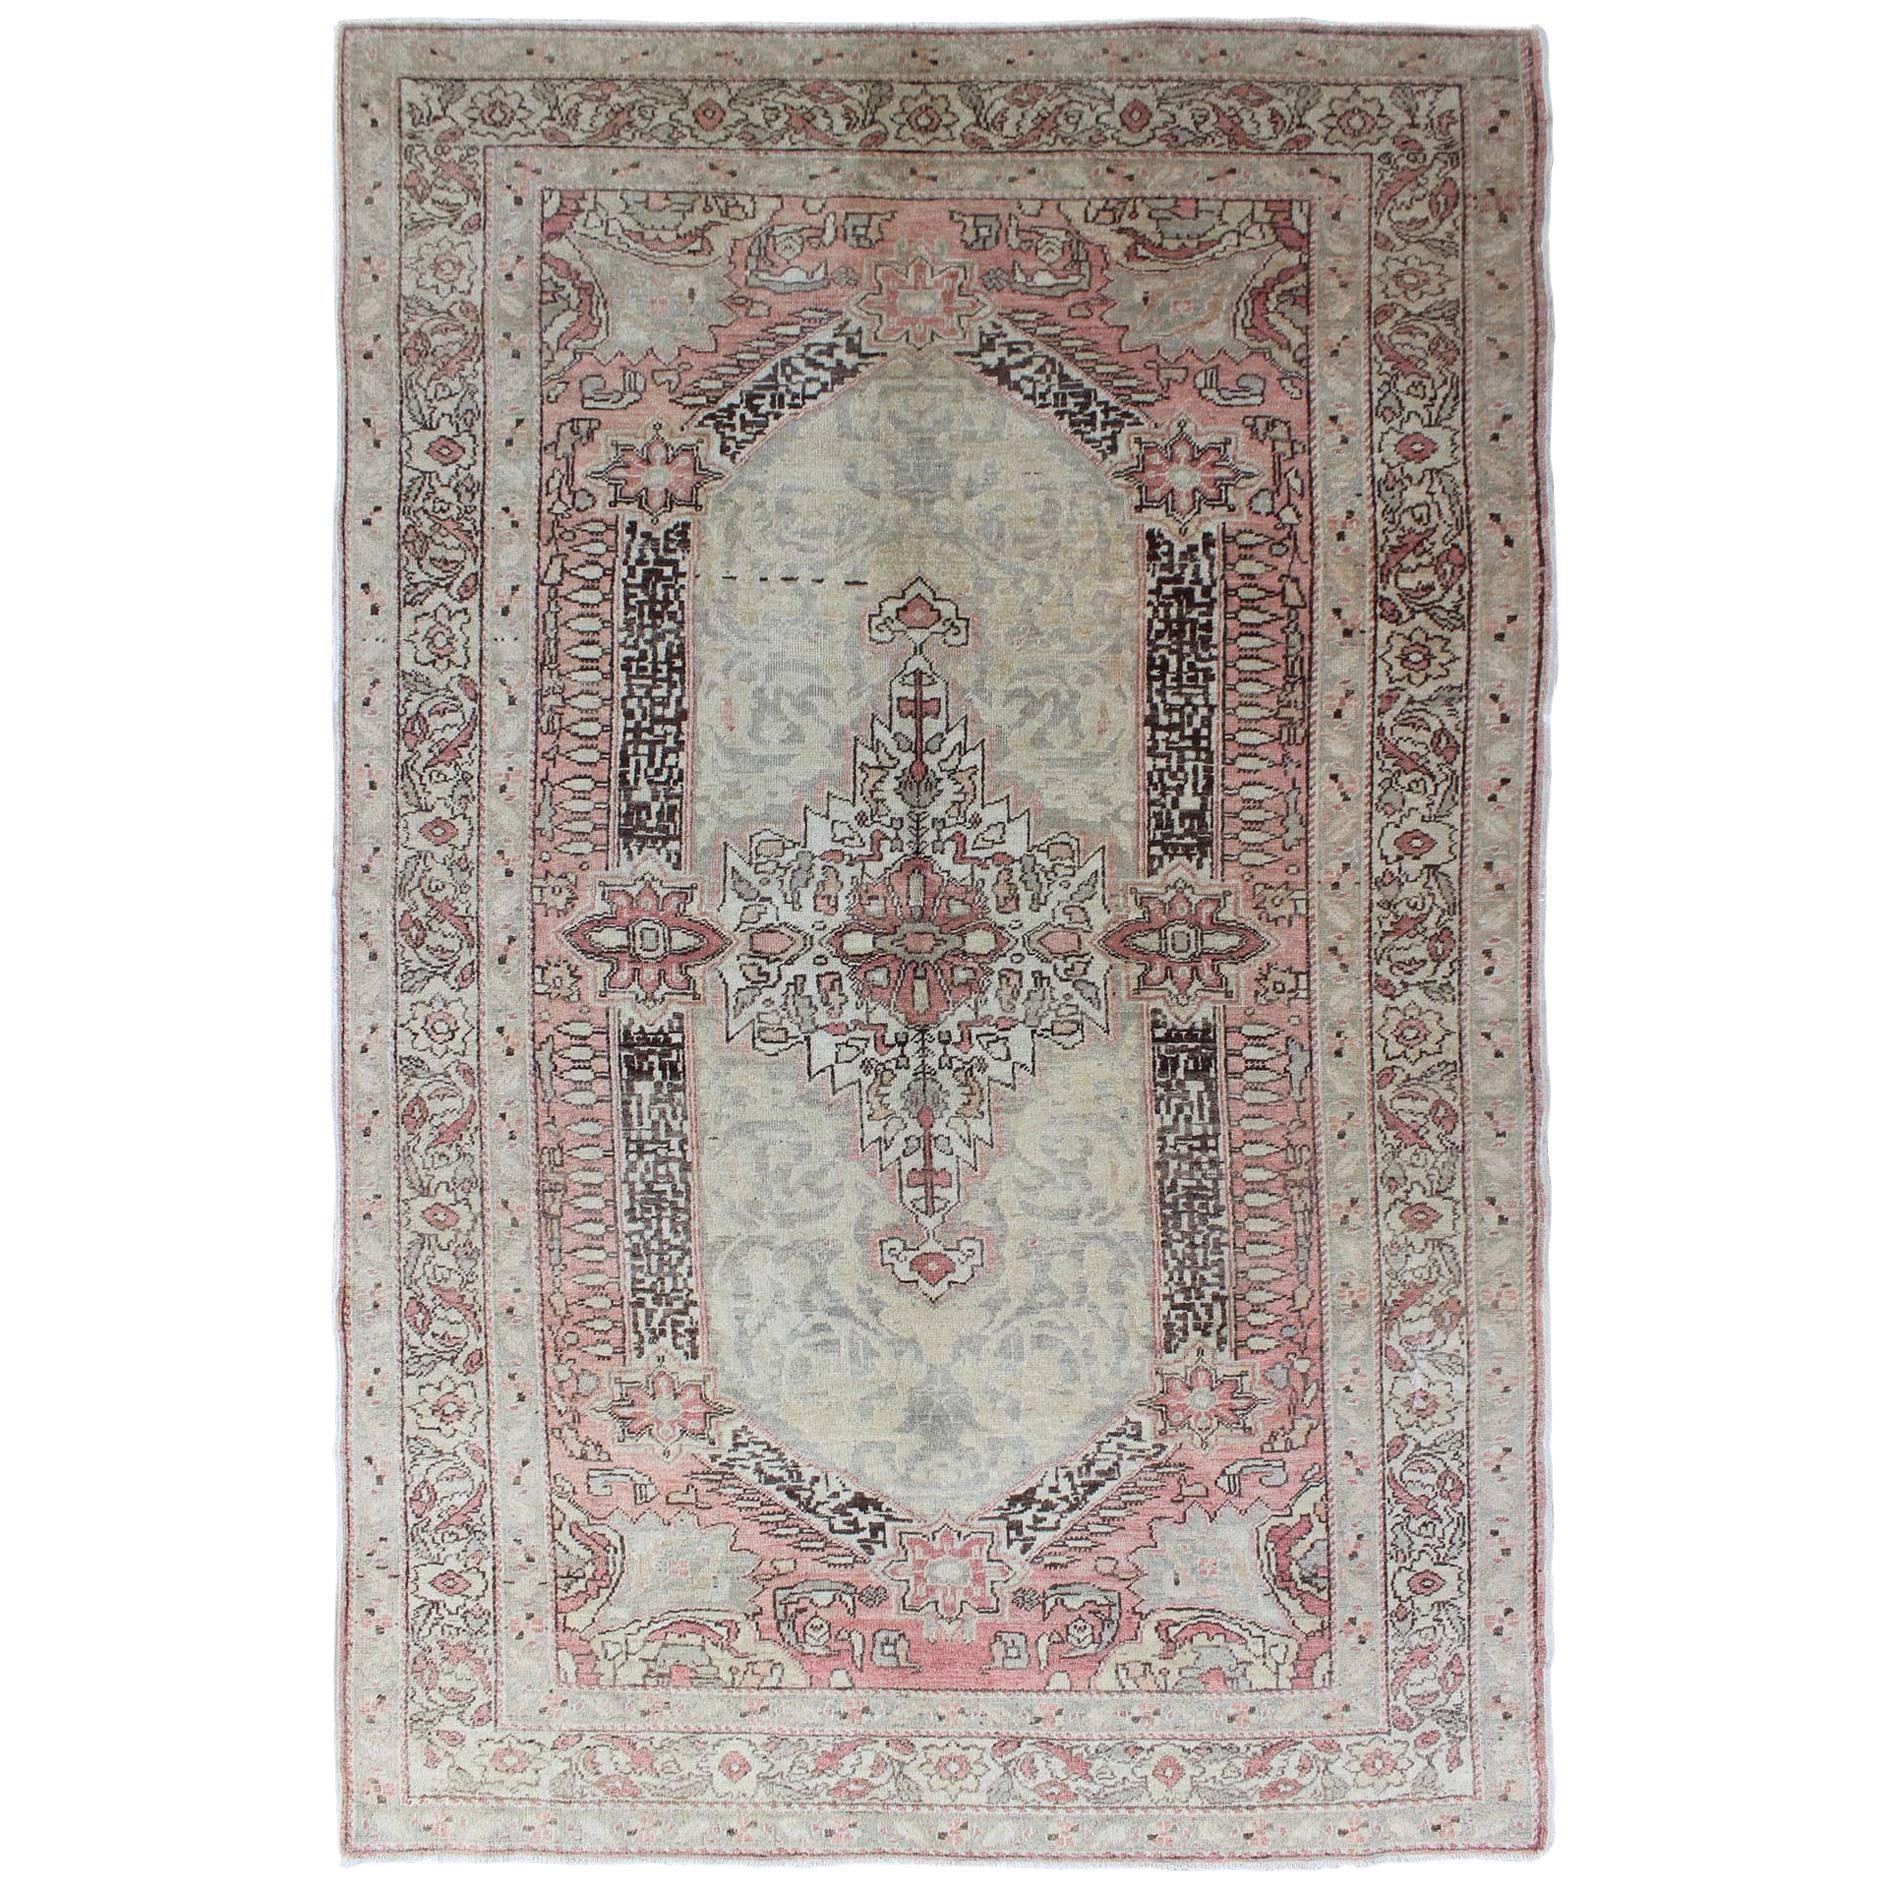 Early 20th Century Antique Turkish Sivas Rug with Delicate Pink Center Medallion For Sale